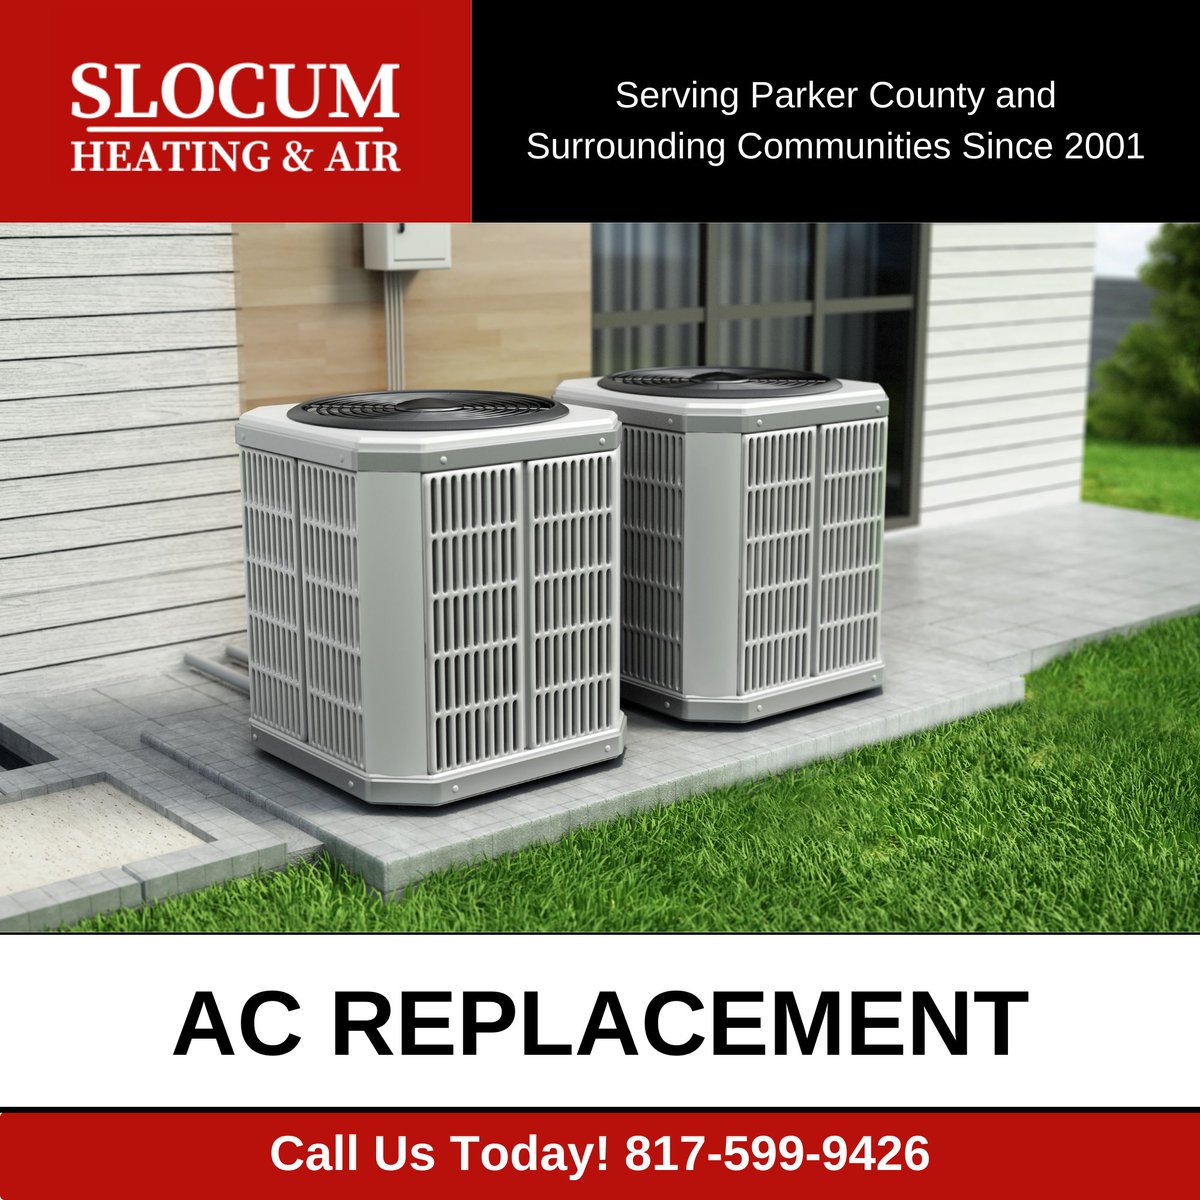 When considering a complete system replacement, it may be wise to consult with local HVAC professionals that have experience with the various phases of an air conditioning system's lifespan.

Call us at Slocum Heating and Air at 817-599-9426 or visit https:/...